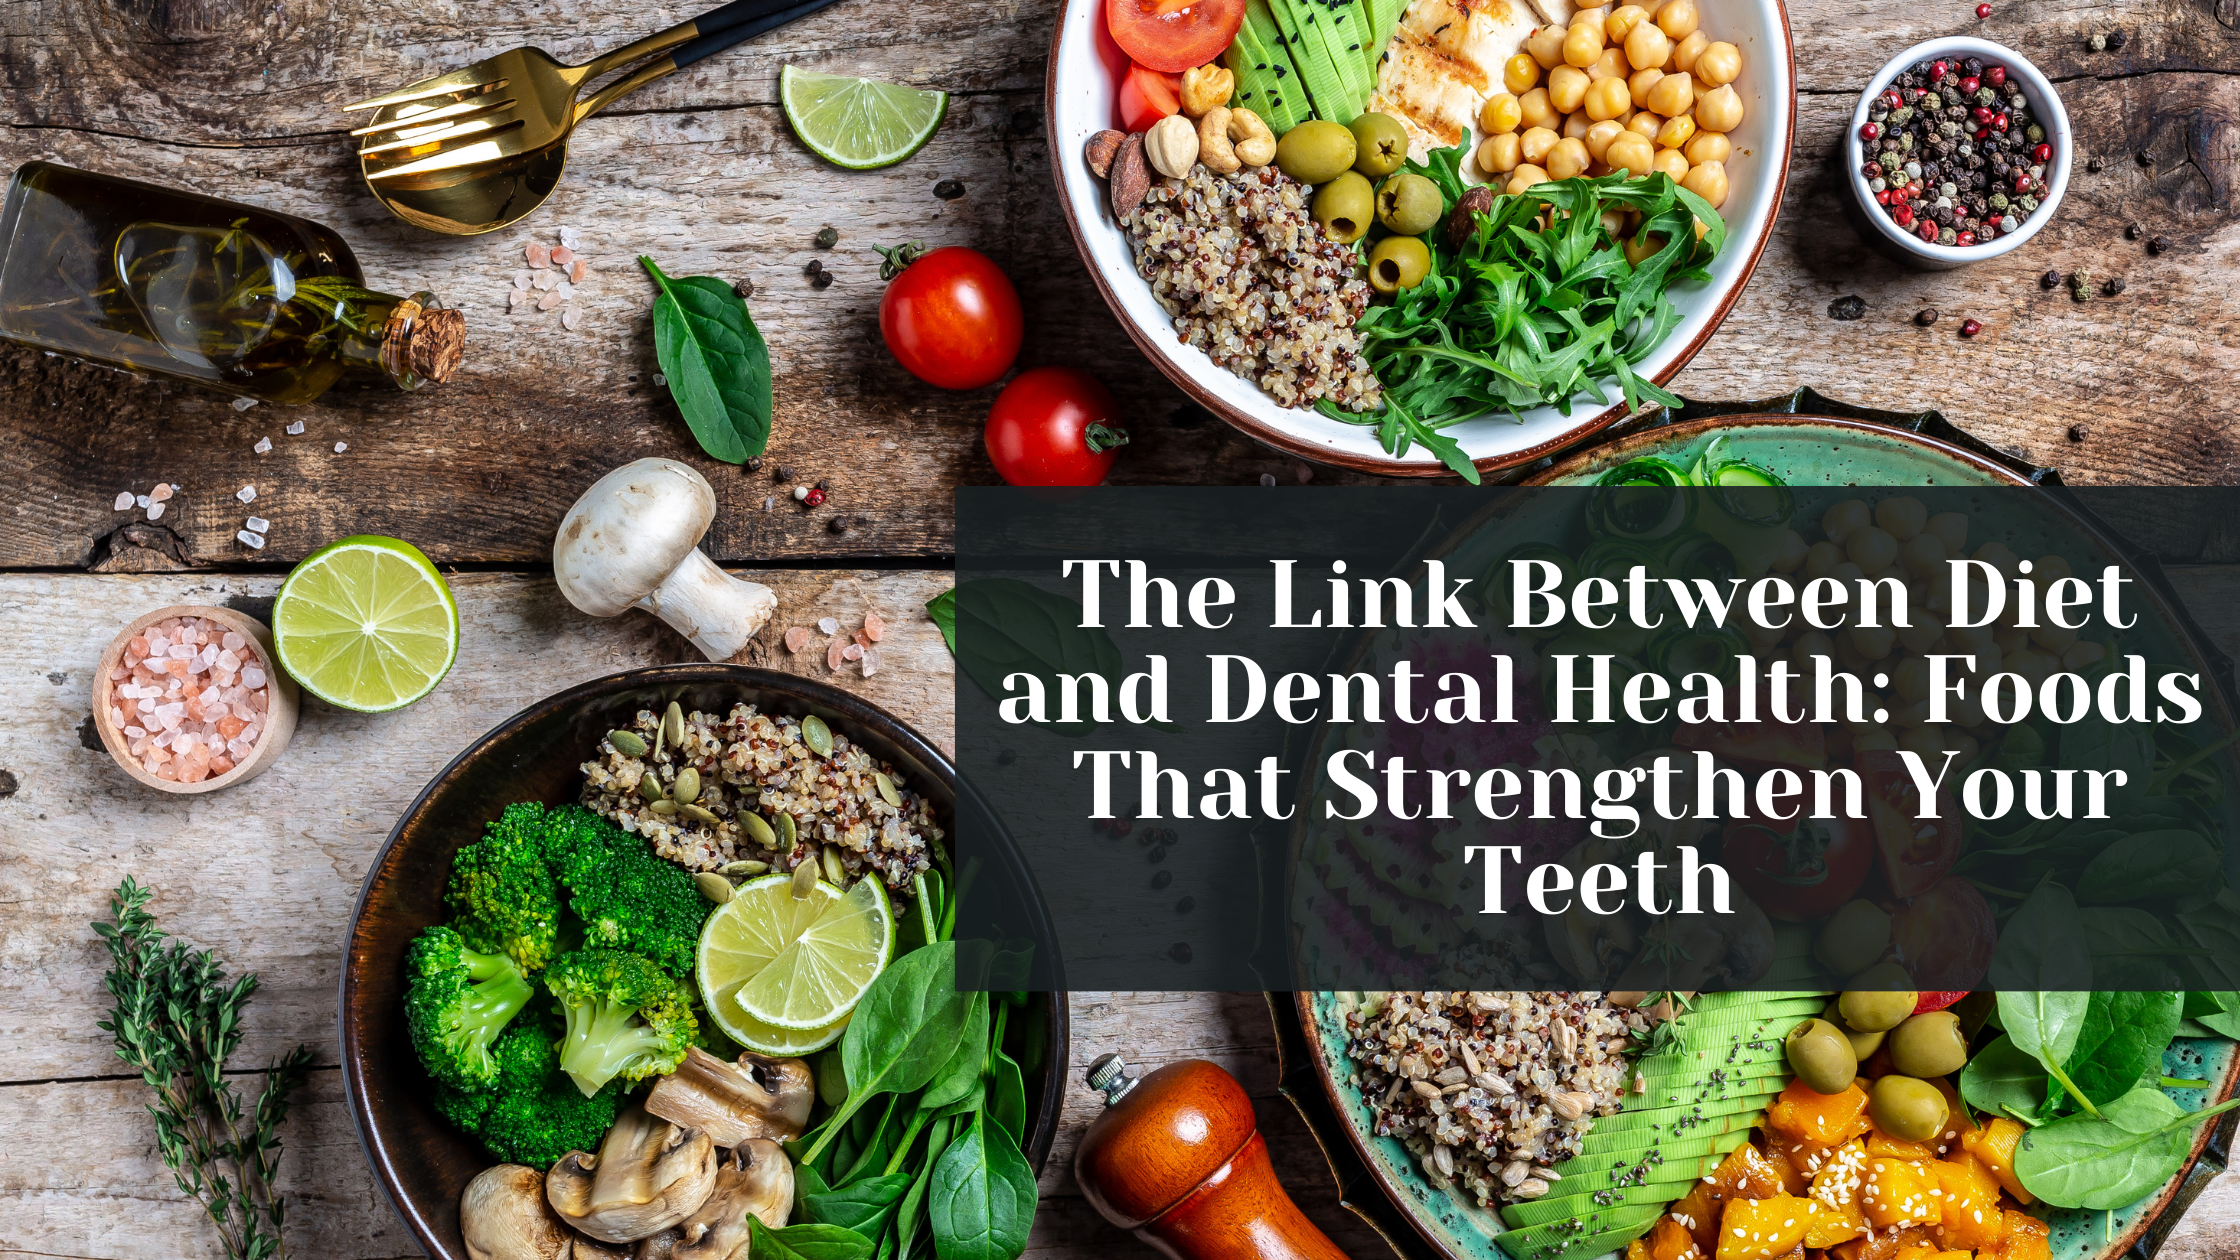 The Link Between Diet and Dental Health: Foods That Strengthen Your Teeth